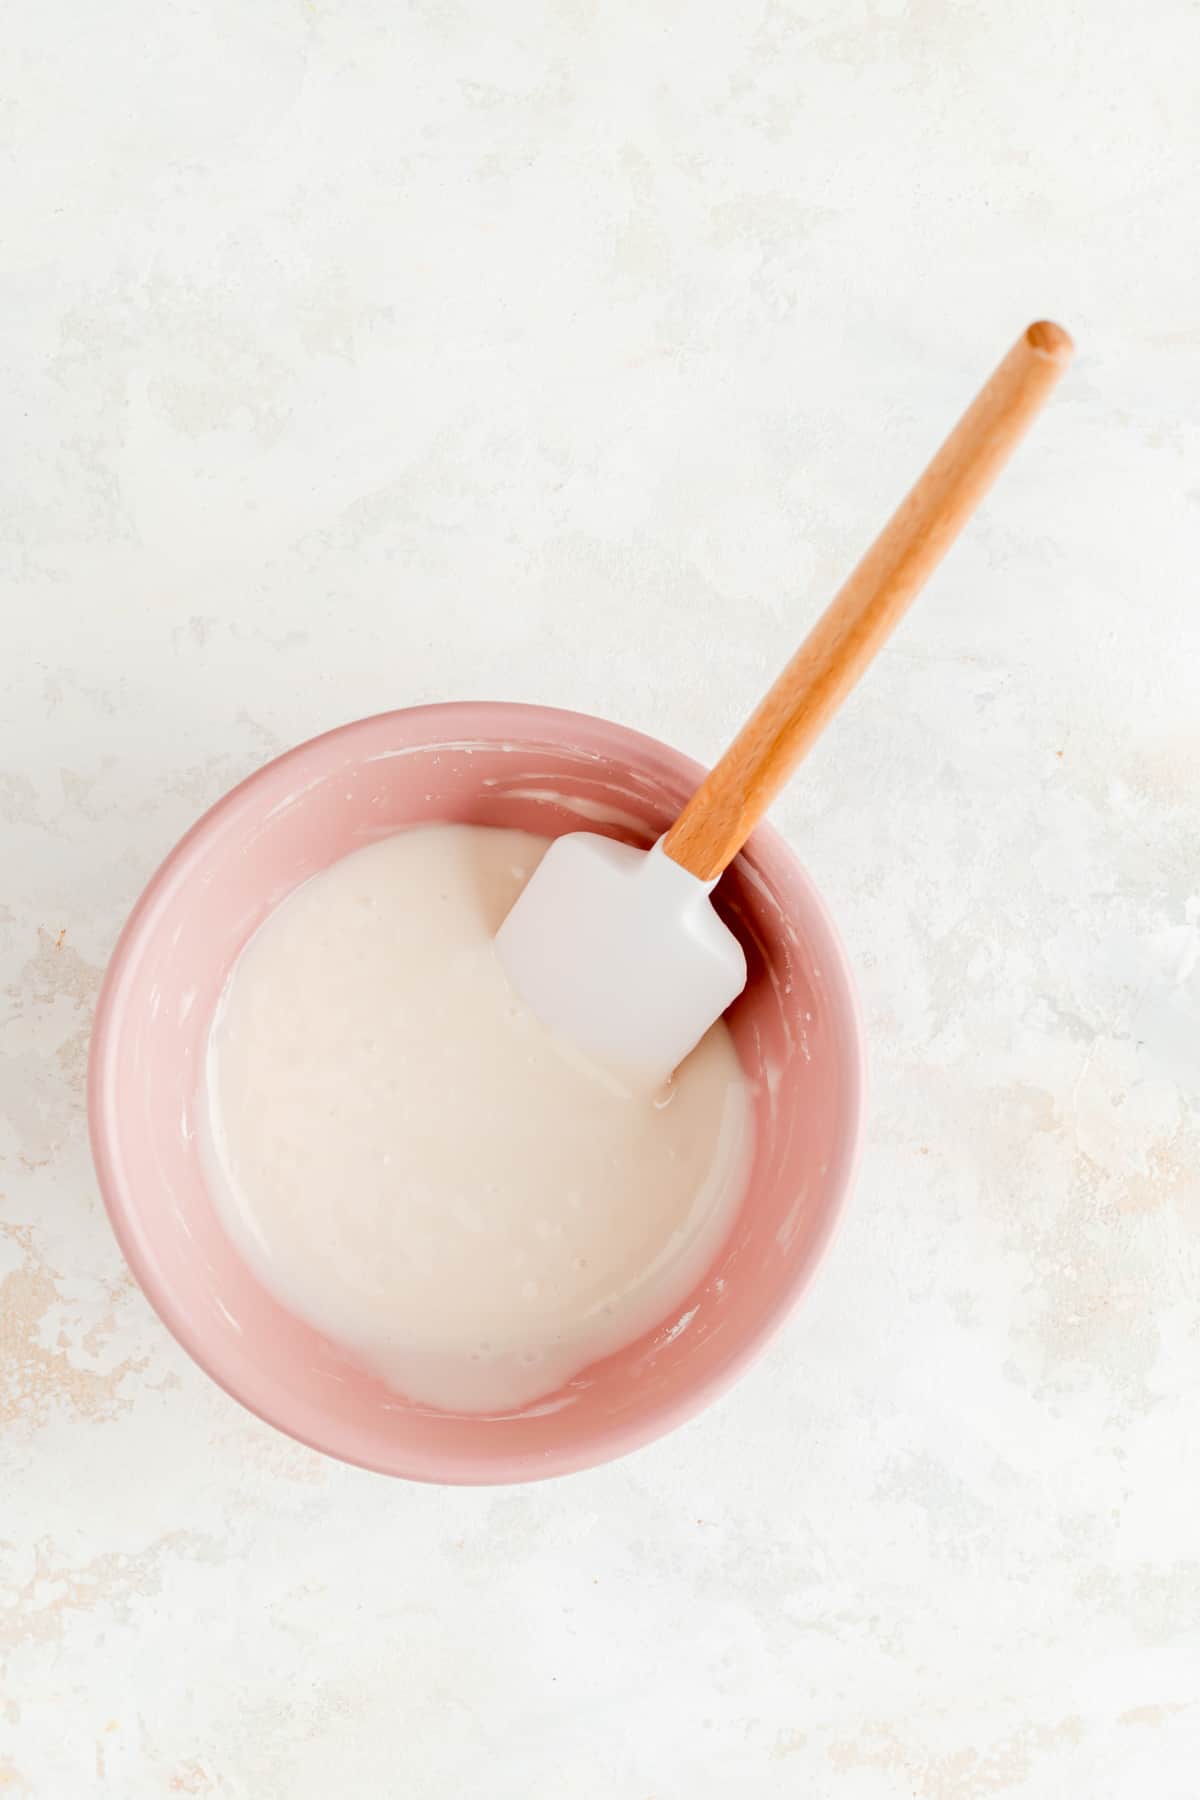 pink bowl with vanilla glaze and a white and wood spatula in it.